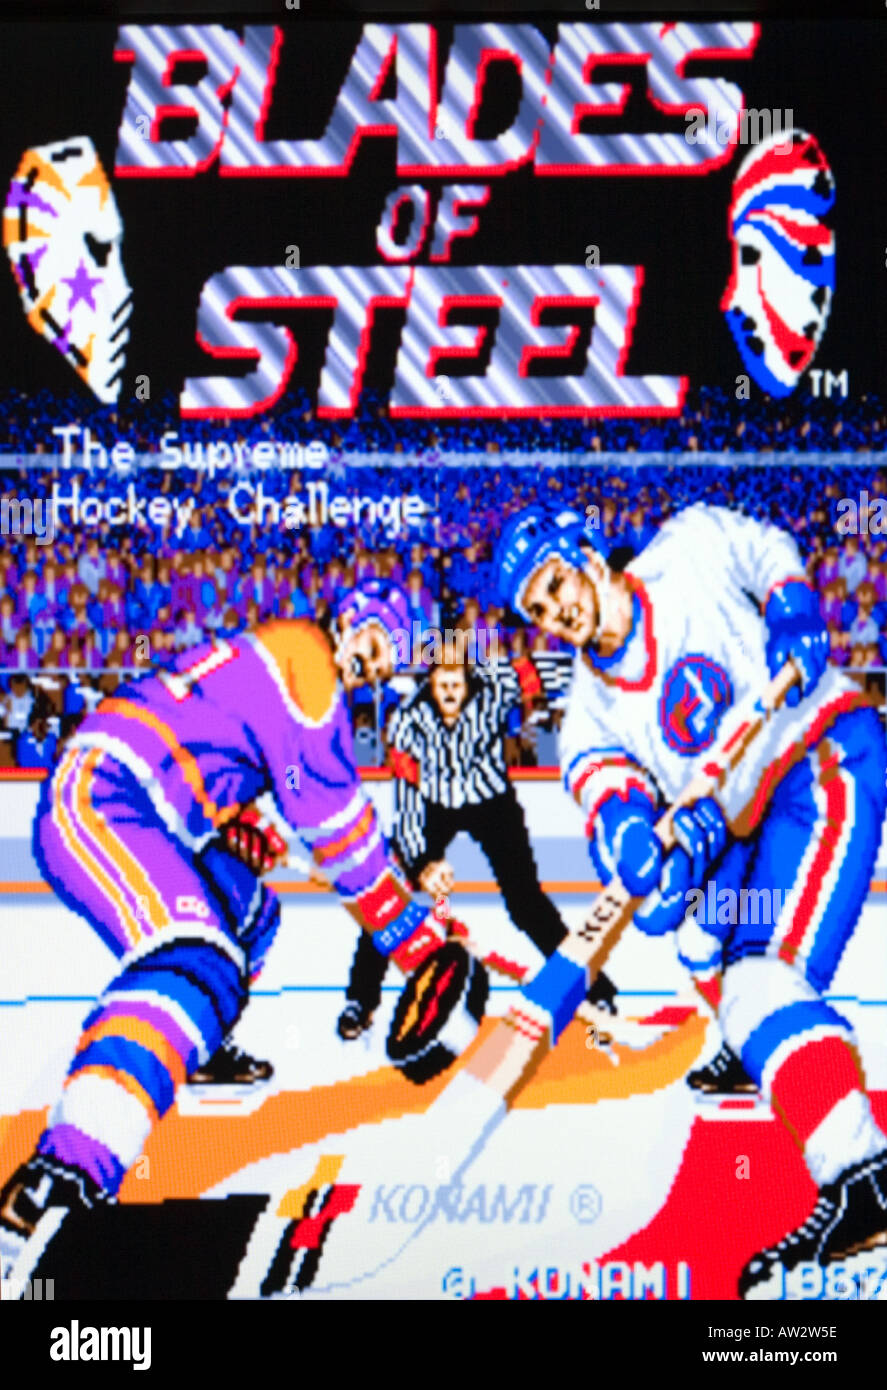 Blades of Steel Konami 1987 Vintage arcade videogame screen shot - EDITORIAL USE ONLY Stock Photo